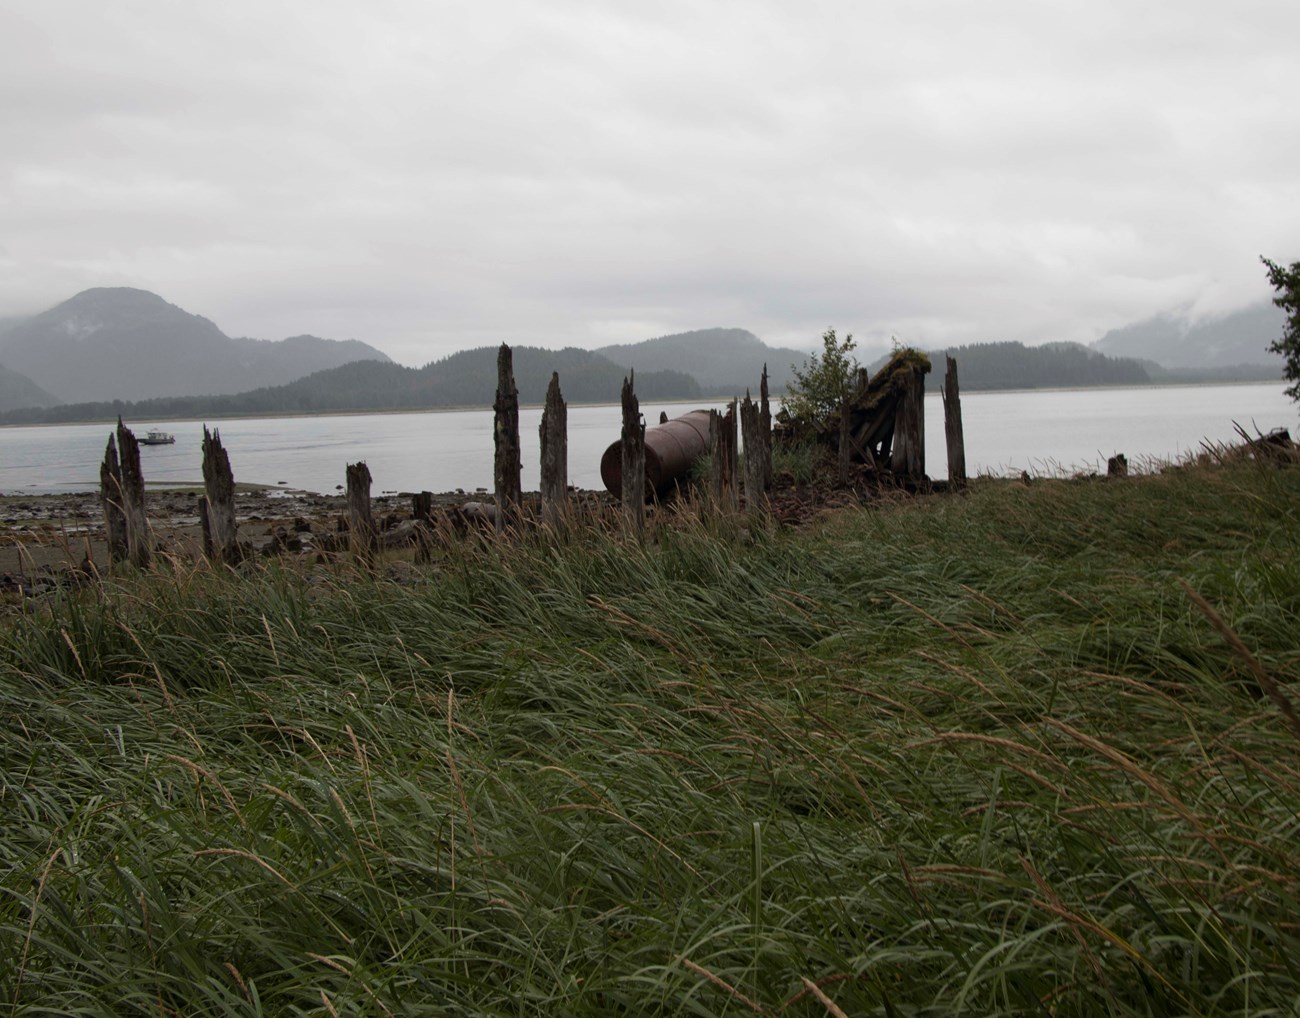 Weathered wooden piers stand in a row along a rocky shore, with long grass in the foreground and foggy mountains in the distance